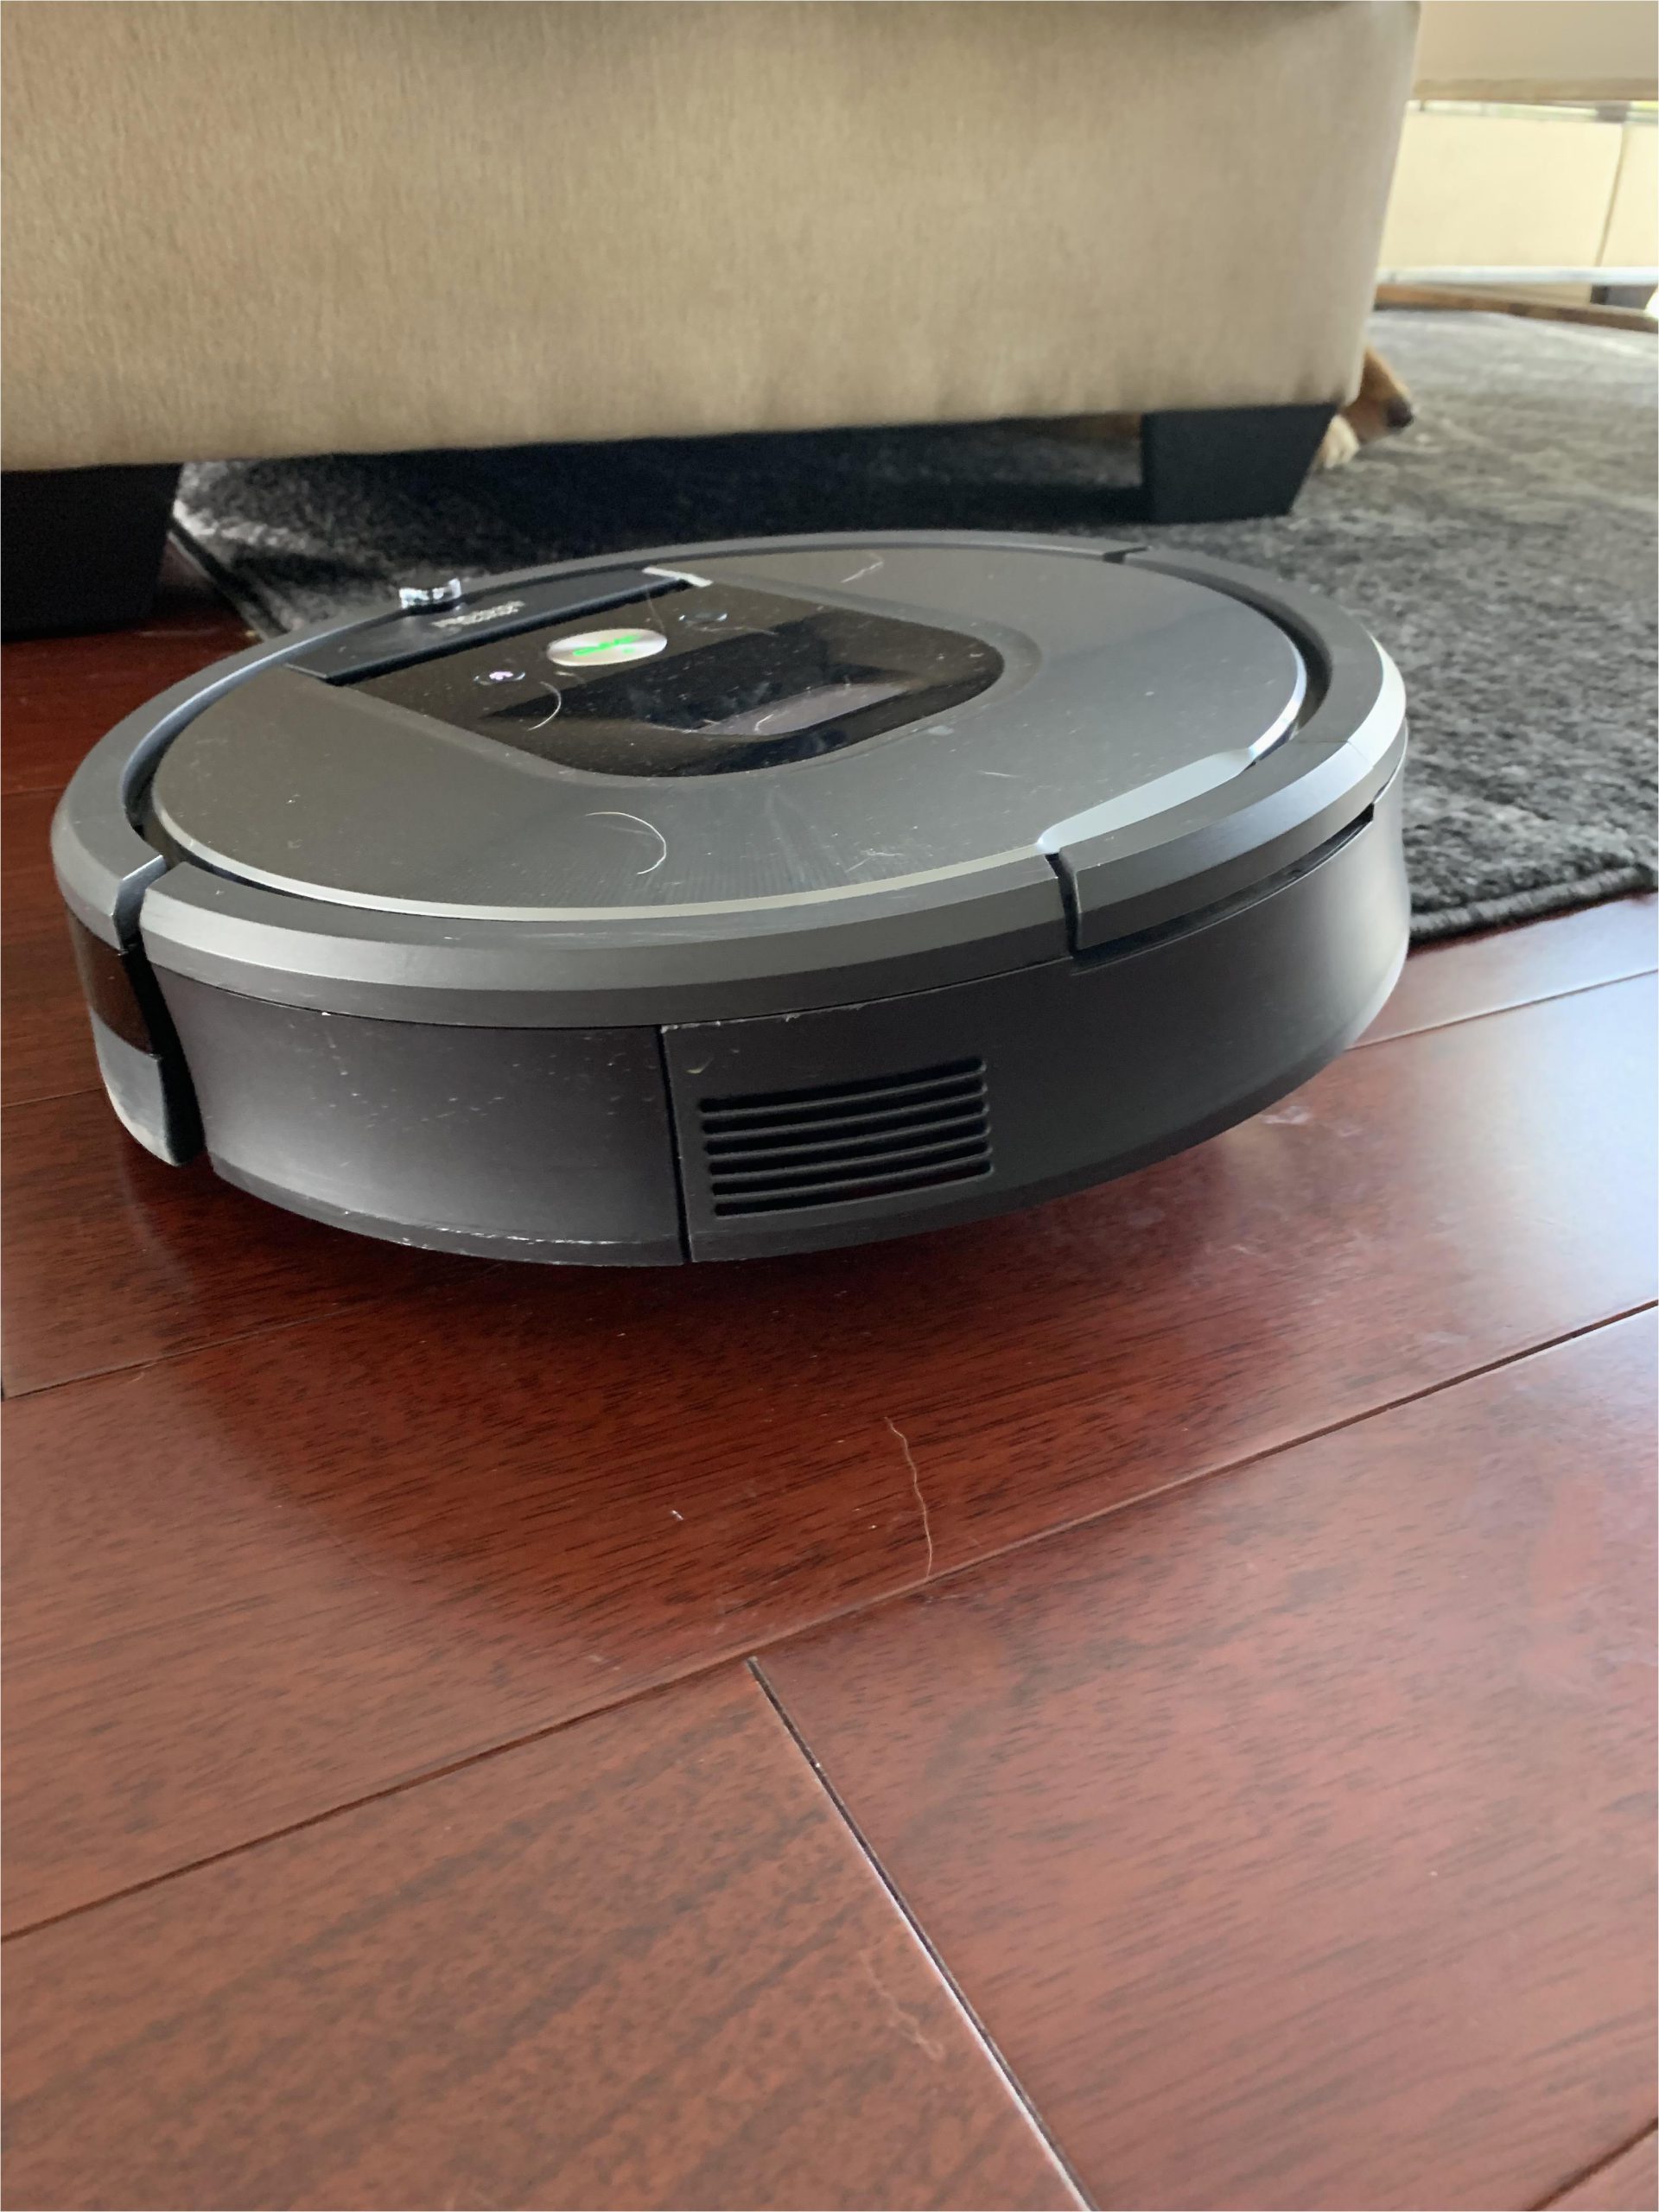 Does Roomba Go Over area Rugs Roomba Ting Stuck On Rug Corners Any Tips Roomba